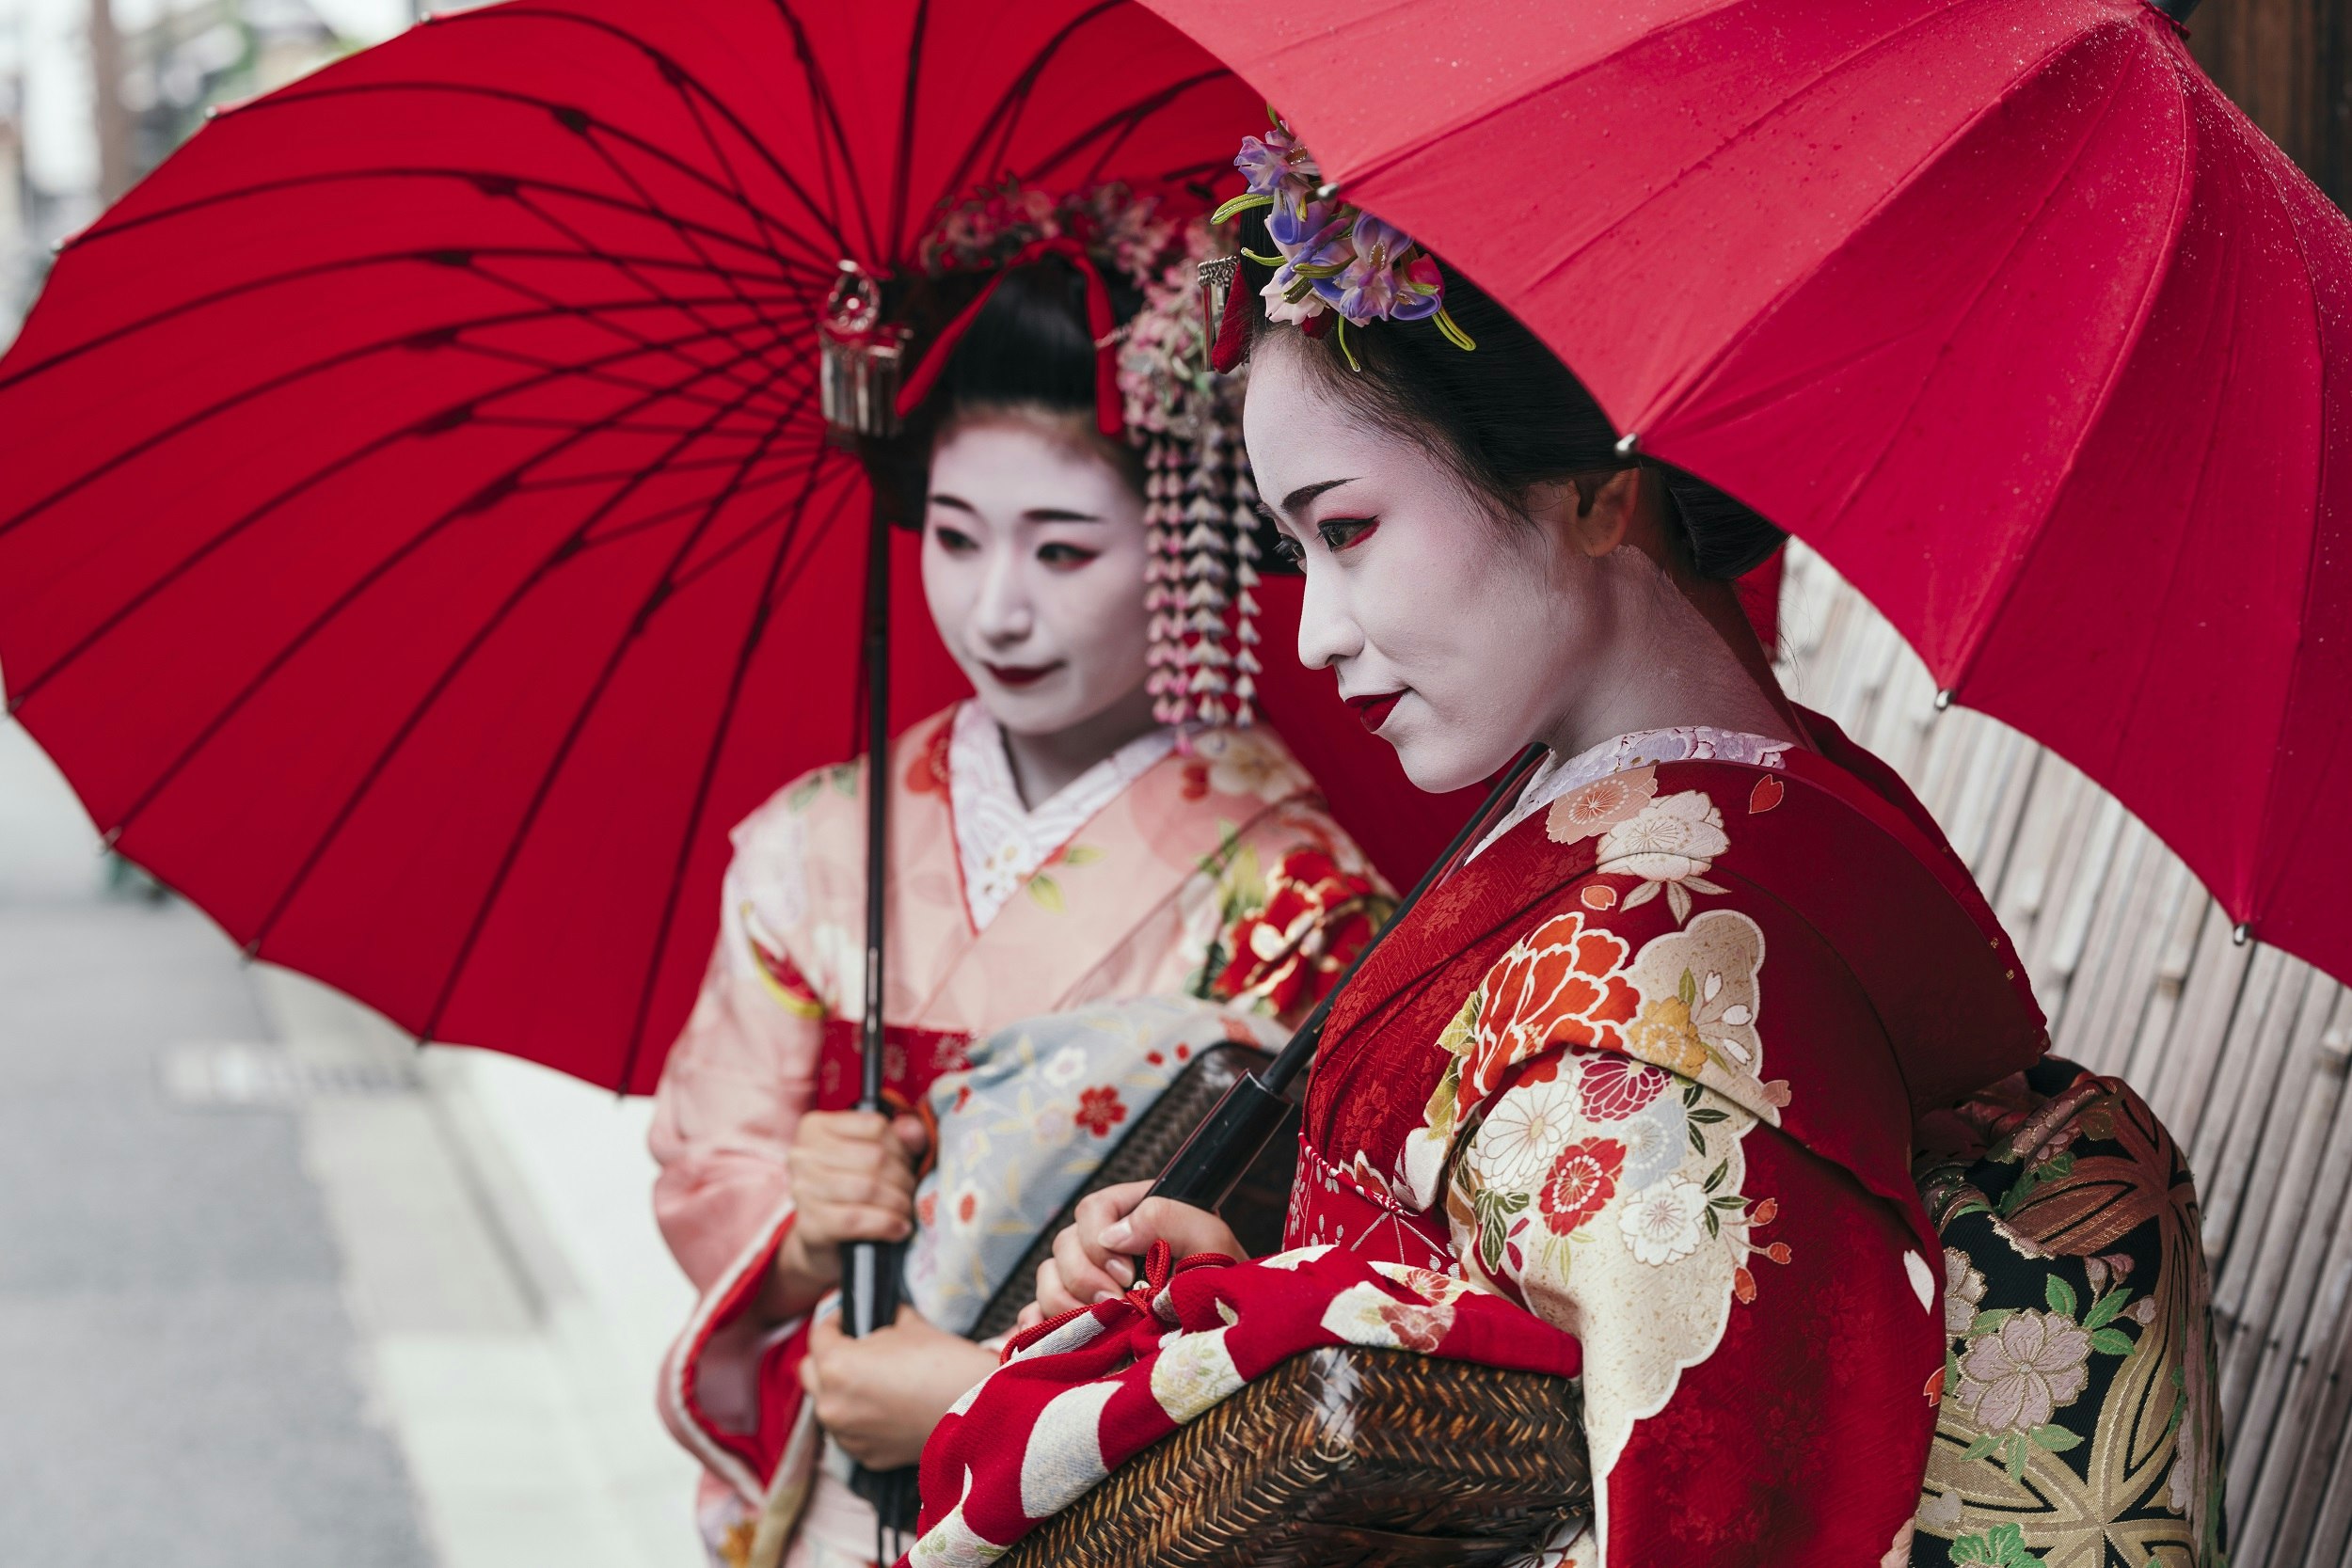 Two geisha in traditional attire stand beneath red umbrellas on the street in Gion.